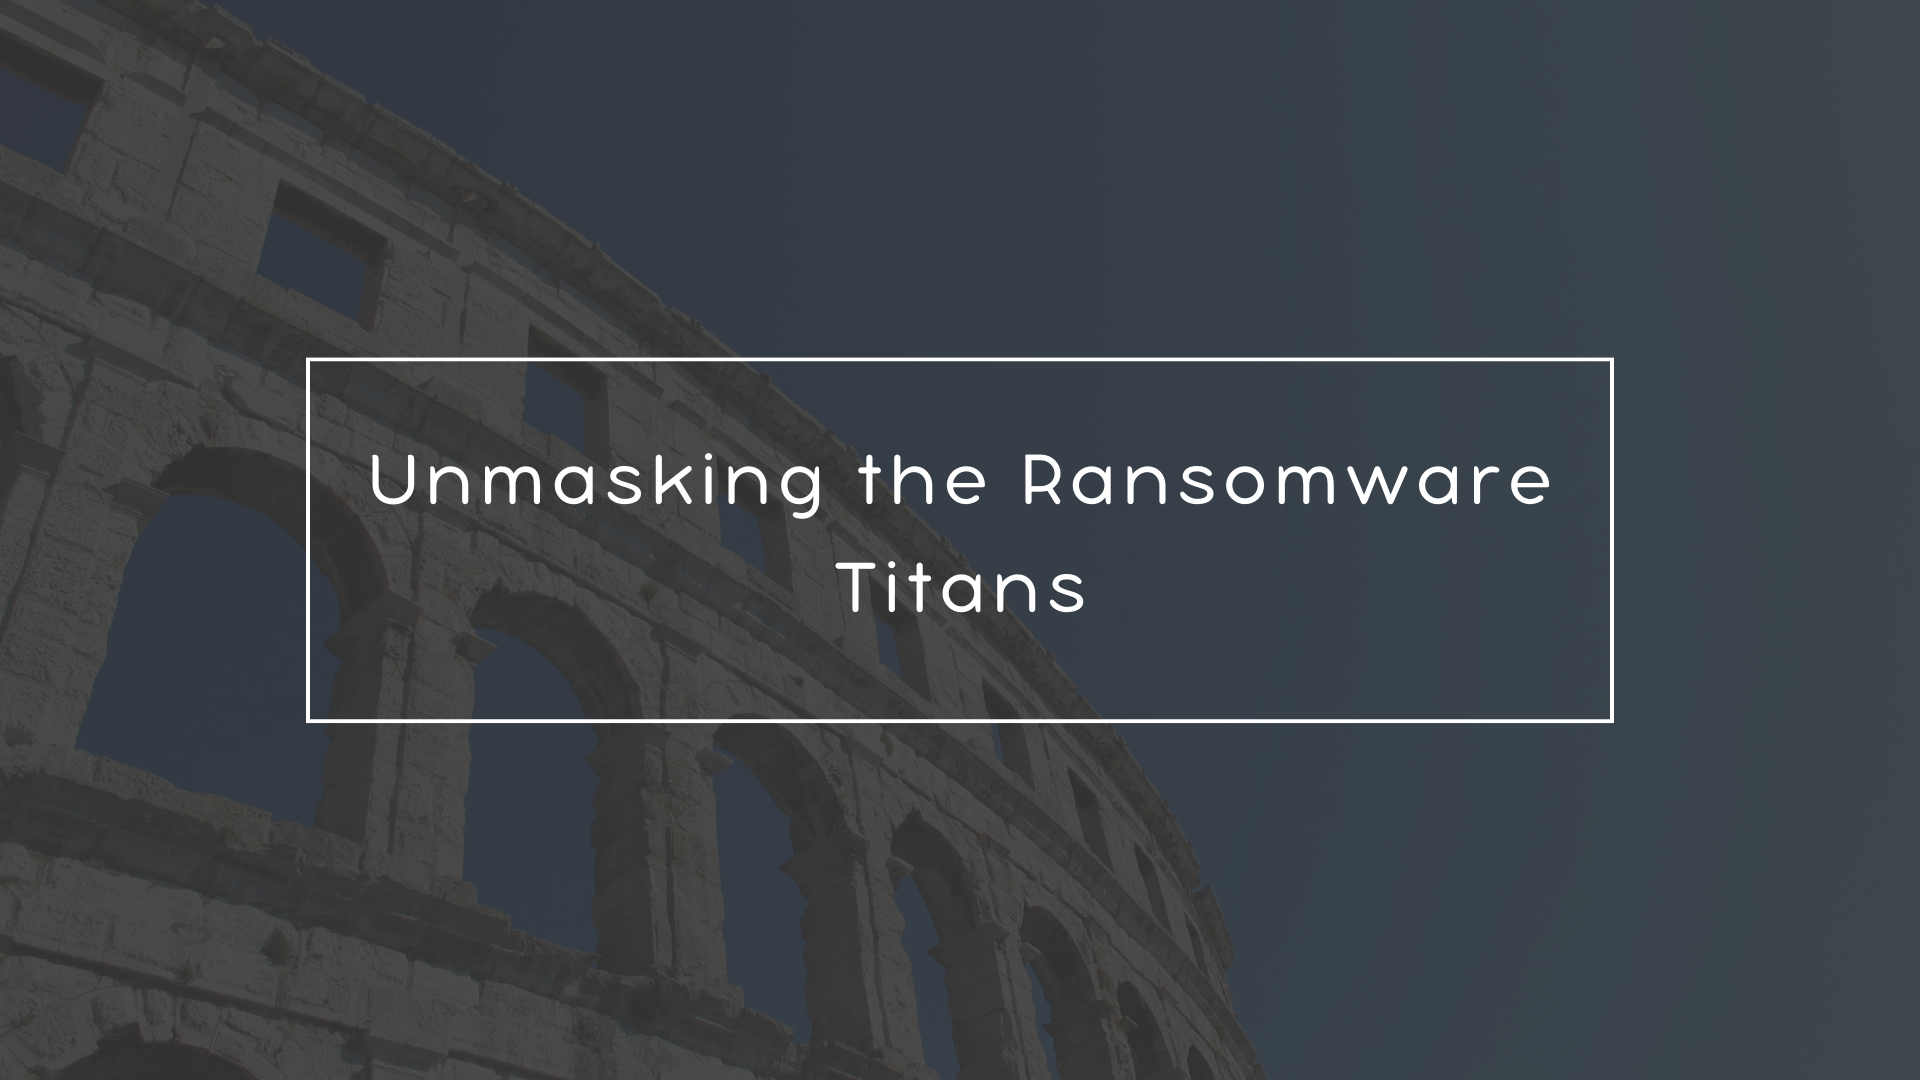 Unmasking the Ransomware Titans